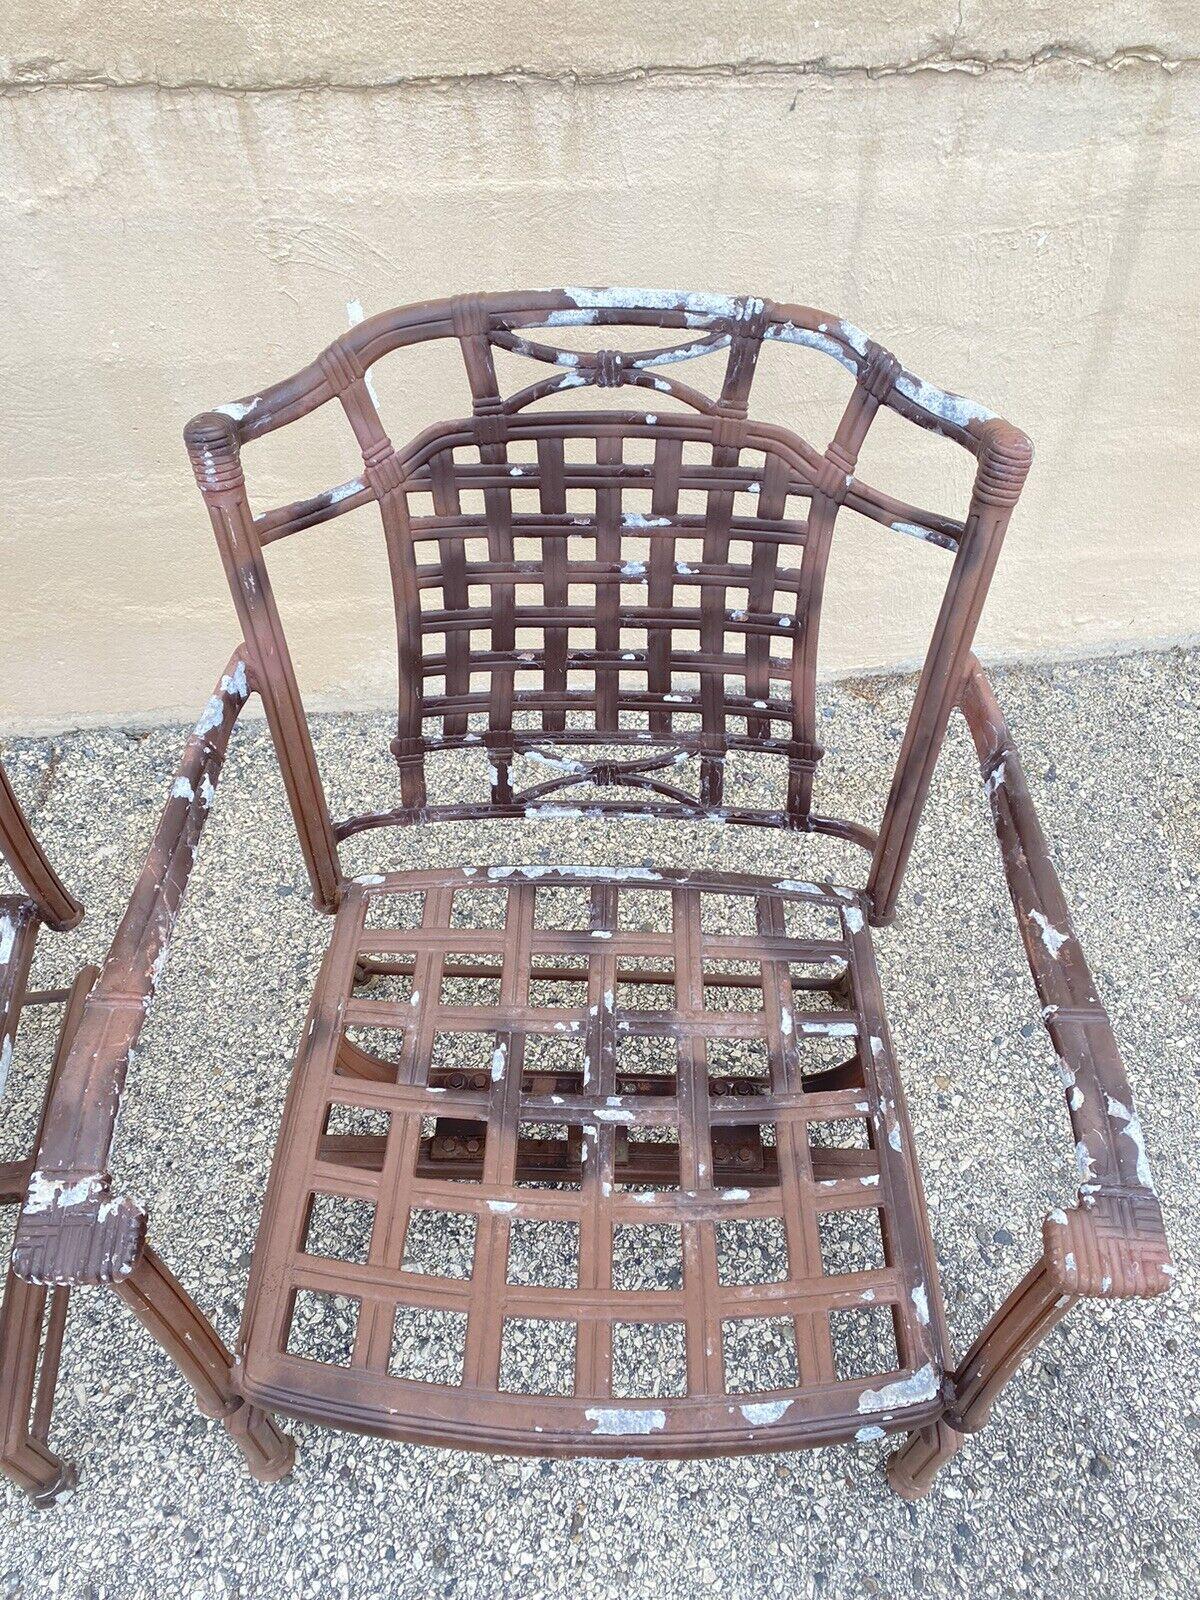 Chinese Cast Aluminum Basket Weave Lattice Patio Outdoor Rocking Lounge Chairs - a Pair For Sale